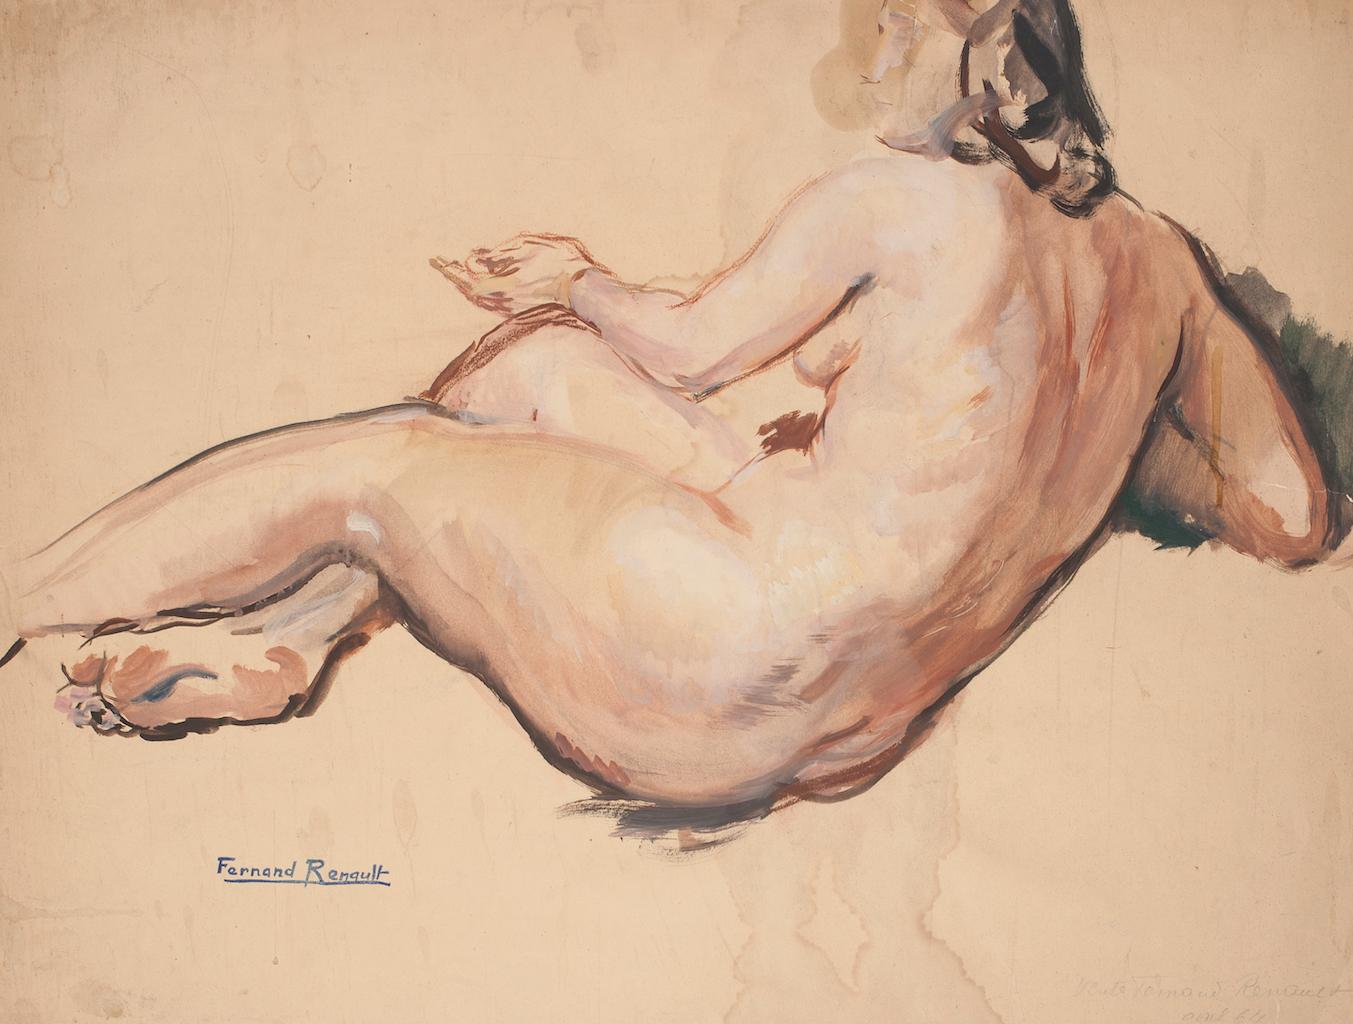 Nude - Original Tempera and Charcoal by Fernand Renault - Early 20th Century - Art by Albert Fernand-Renault